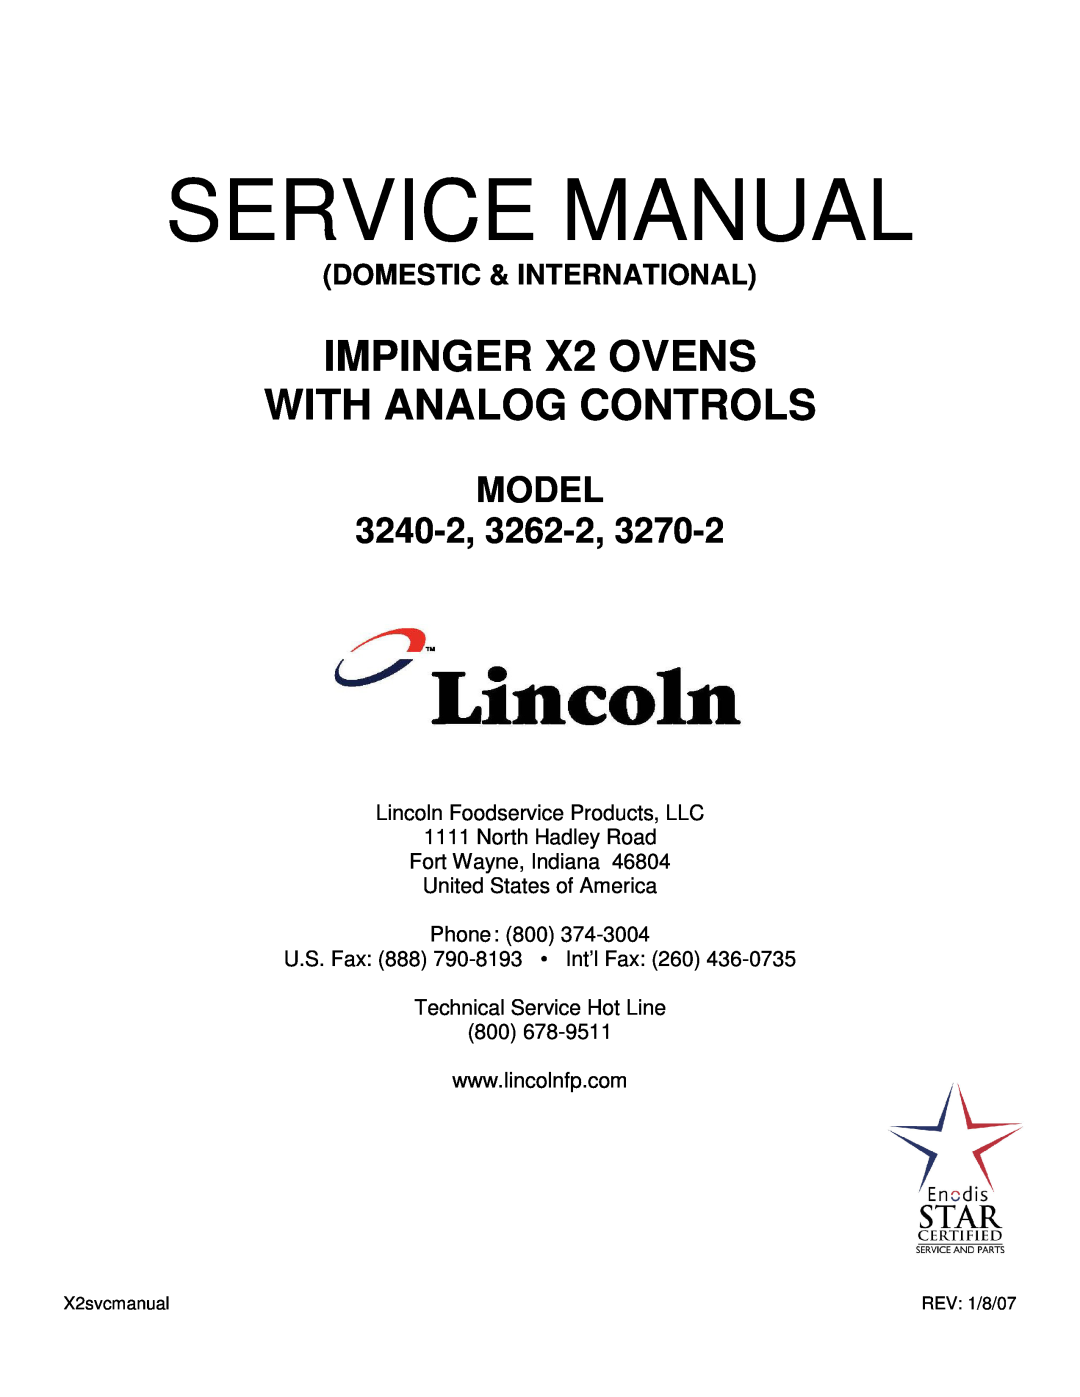 Lincoln 3262 service manual Lincoln Foodservice Products, Inc, North Hadley Road P.O. Box, Technical Service Hot Line 